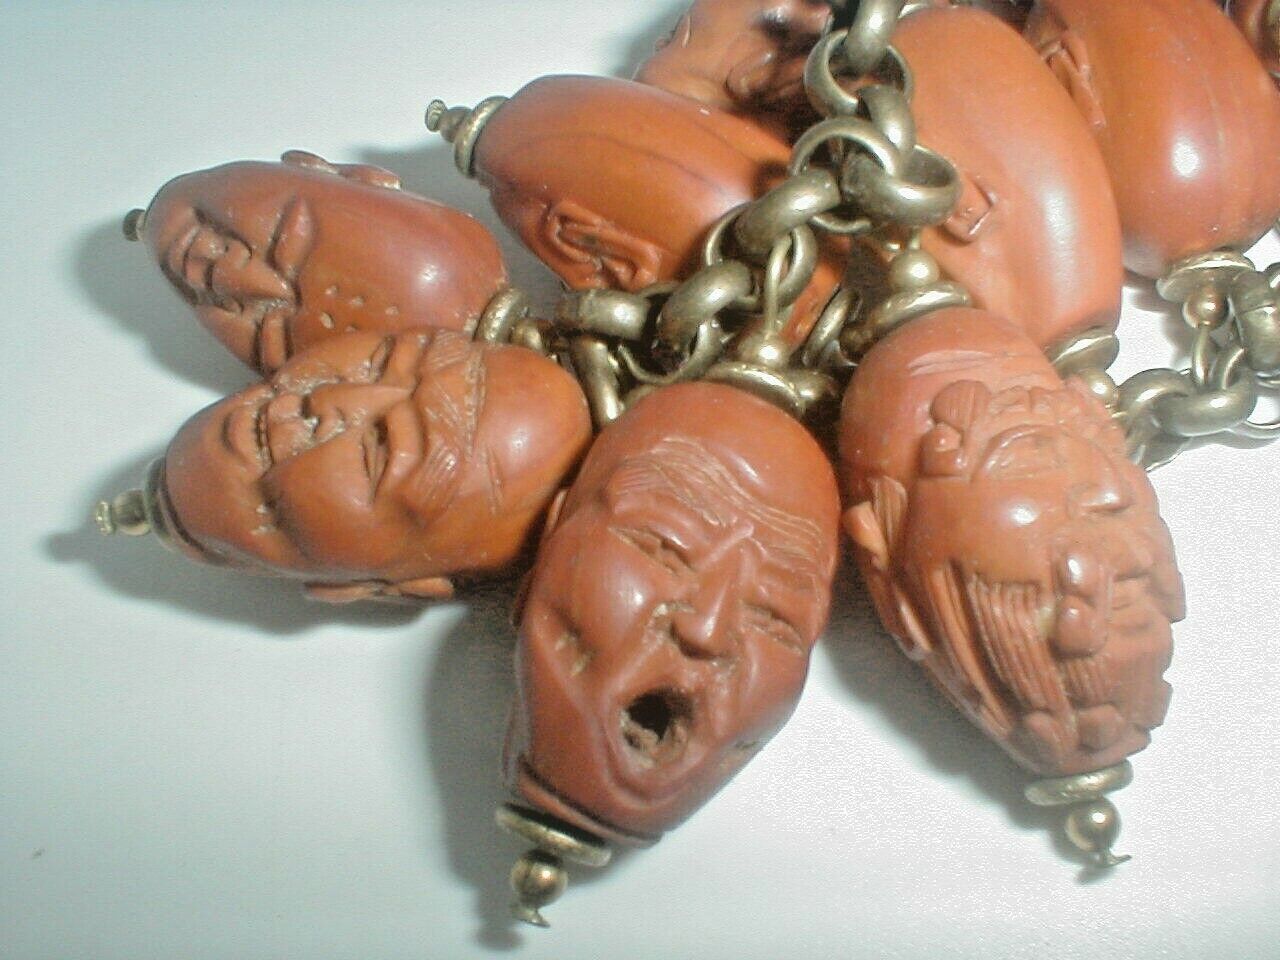 AUTHENTIC Asian MAN FACE Carved 18 BEAD PEACH PIT SCULPTURE GODS into necklace